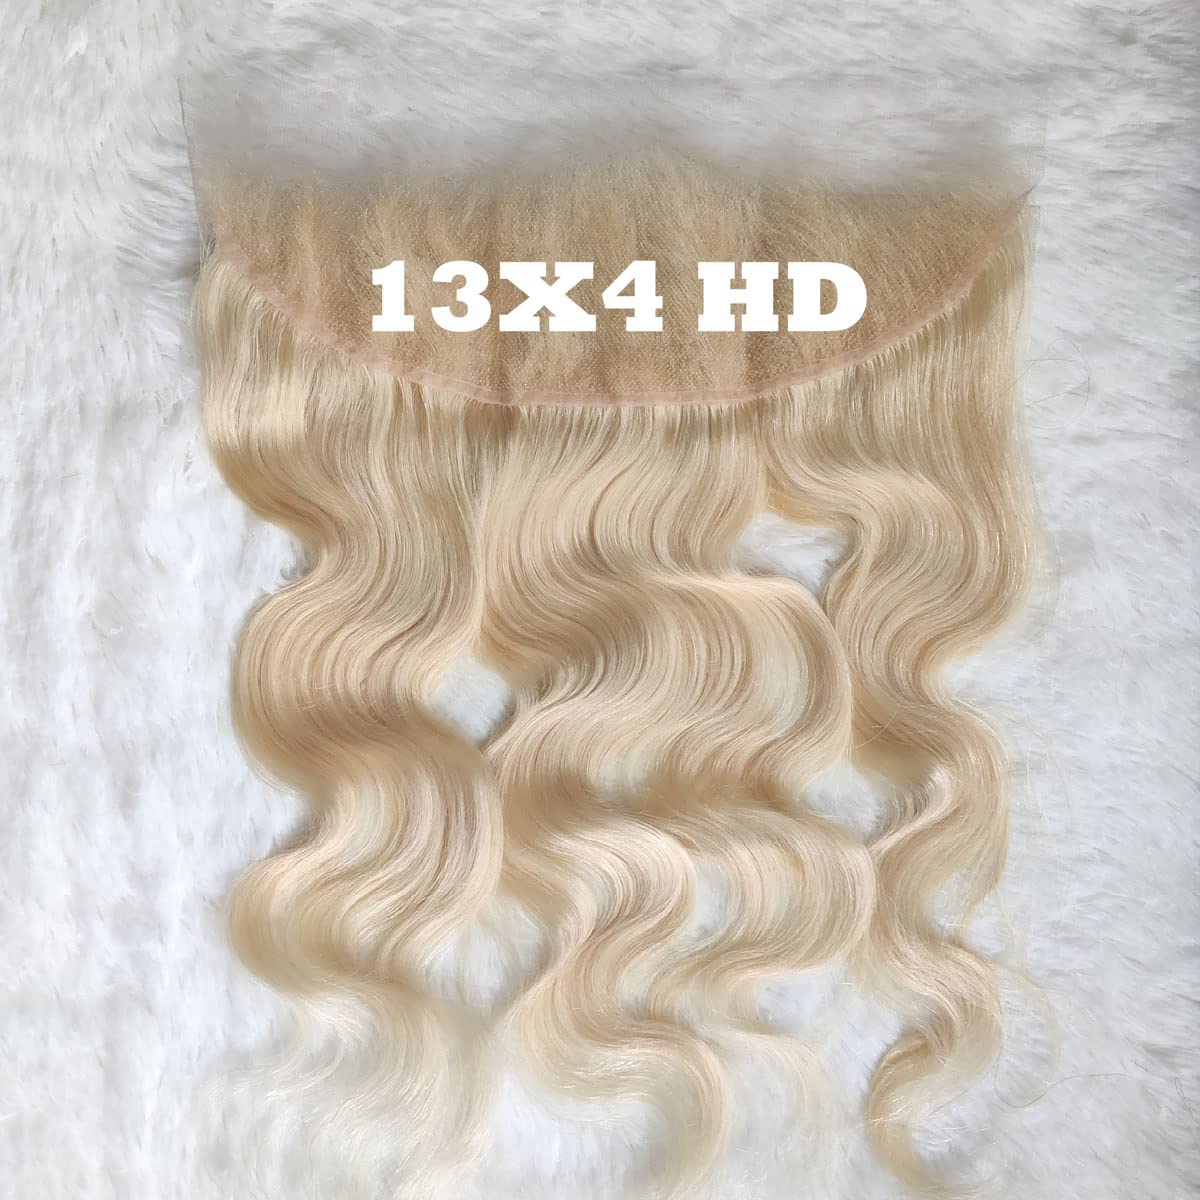 Forawme 10A Brazilian Blonde Hair Body Wave Pre Plucked High Definition Full Lace Frontals Human Hair Pieces 16 Inch 13X4 Ear To Ear 613 HD Transparent Swiss Lace Frontal Closure With Natural Hairline